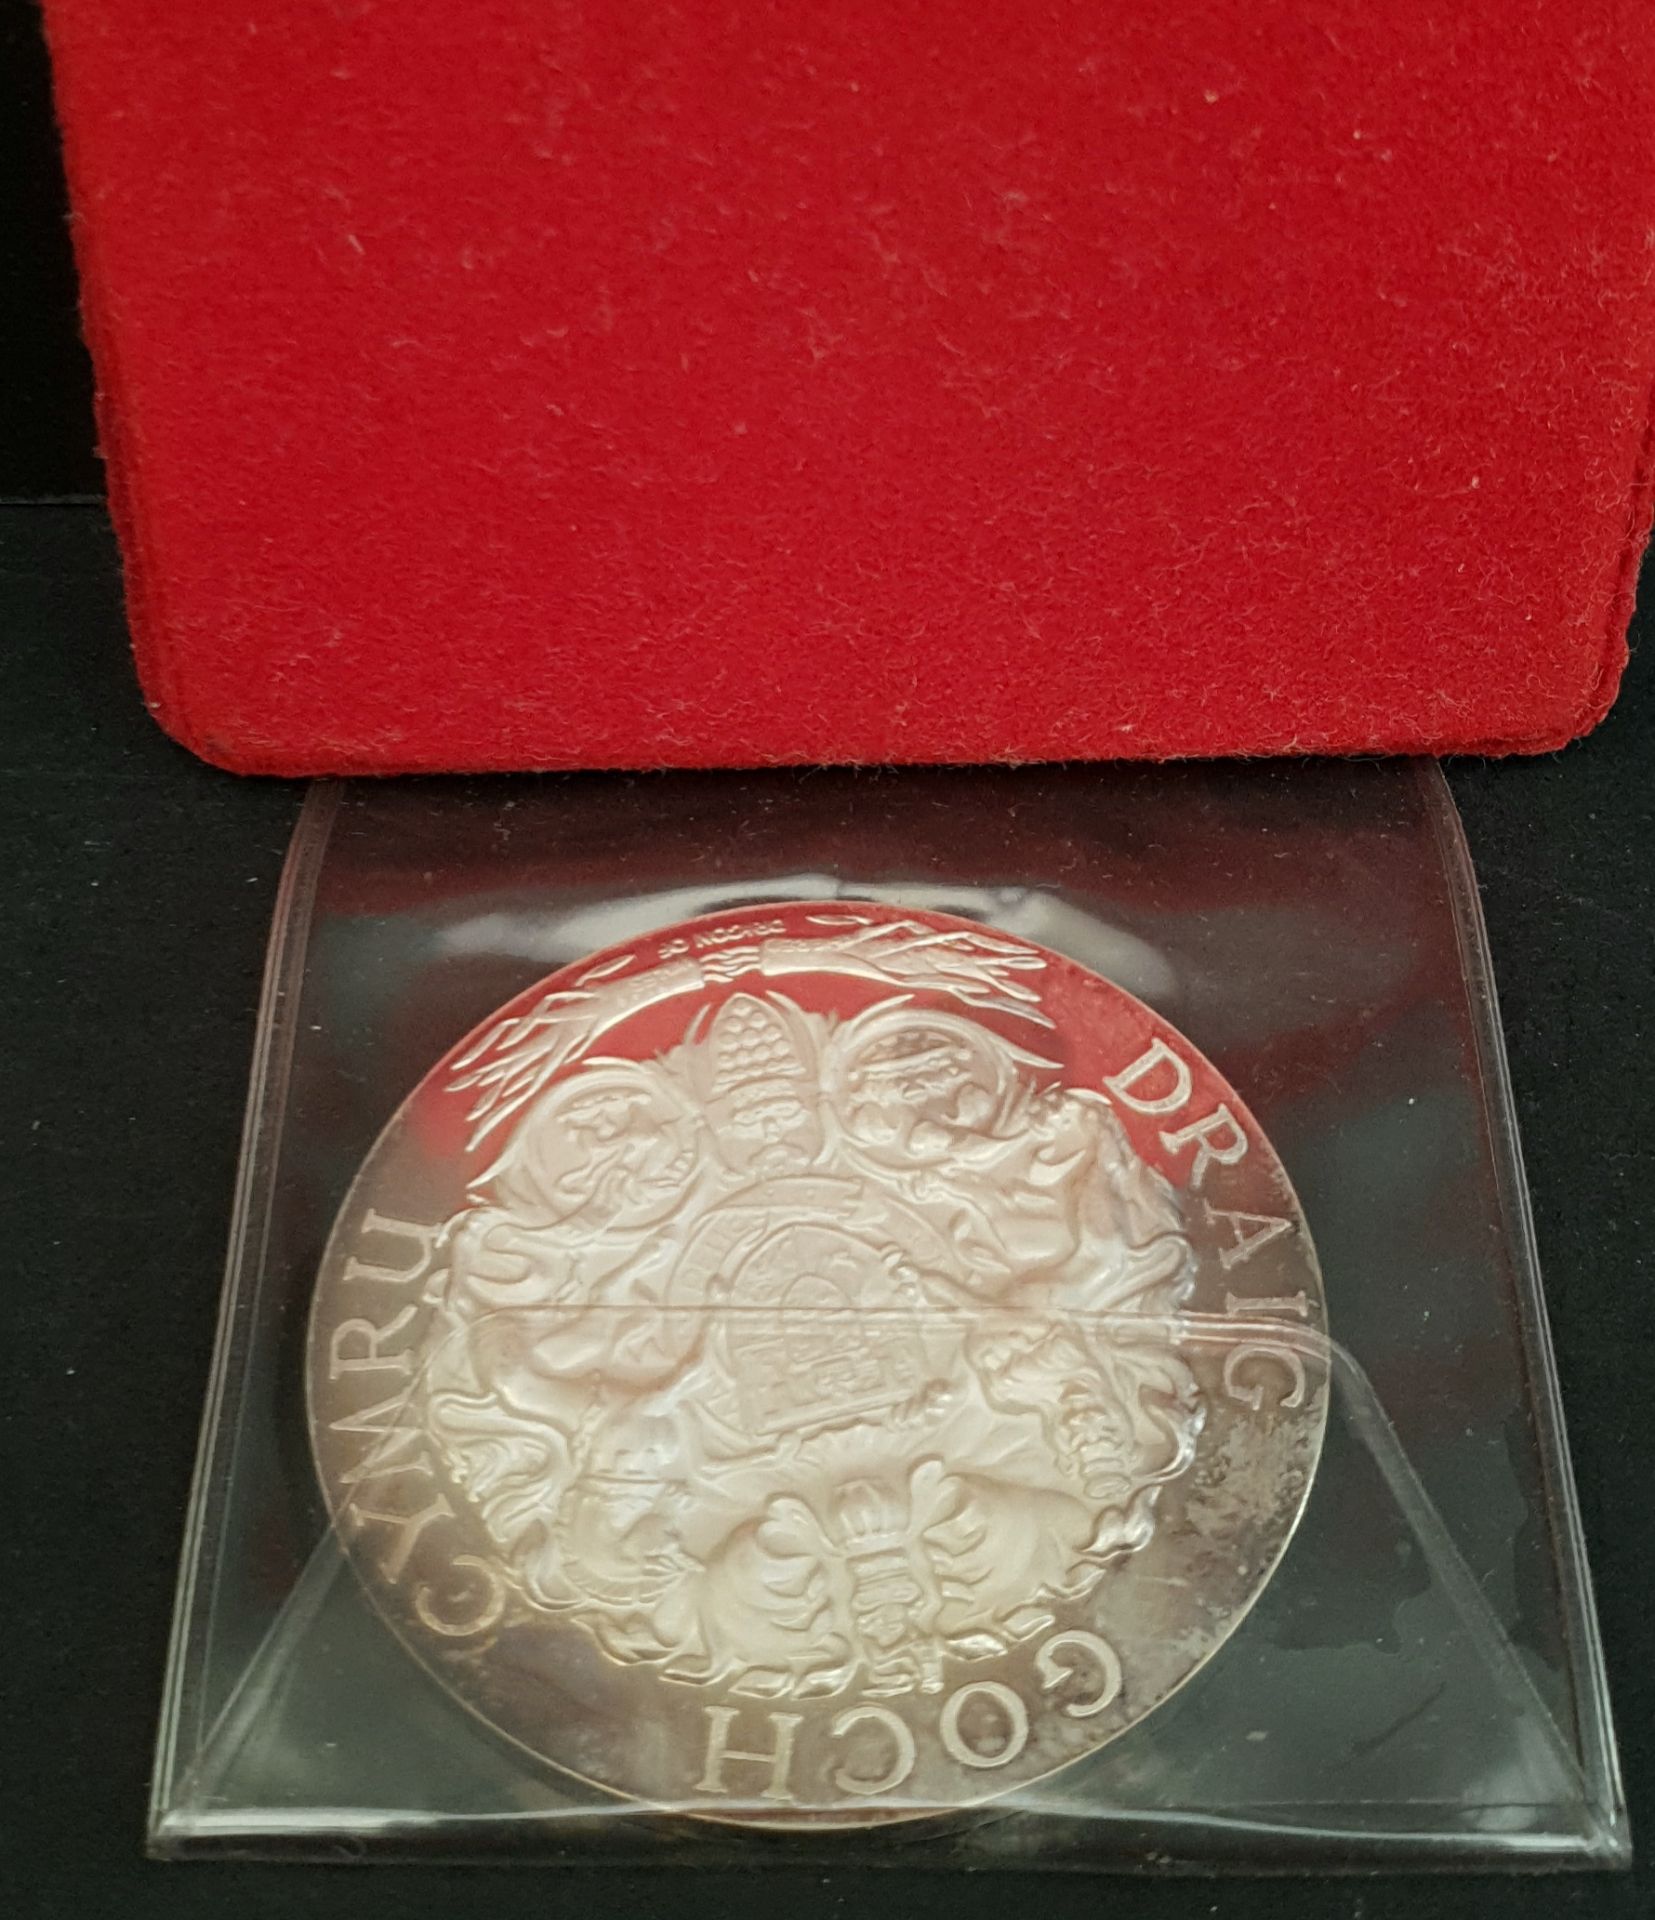 Collectable Coin Sterling Silver Prince Charles Investiture 1969 - Image 2 of 4